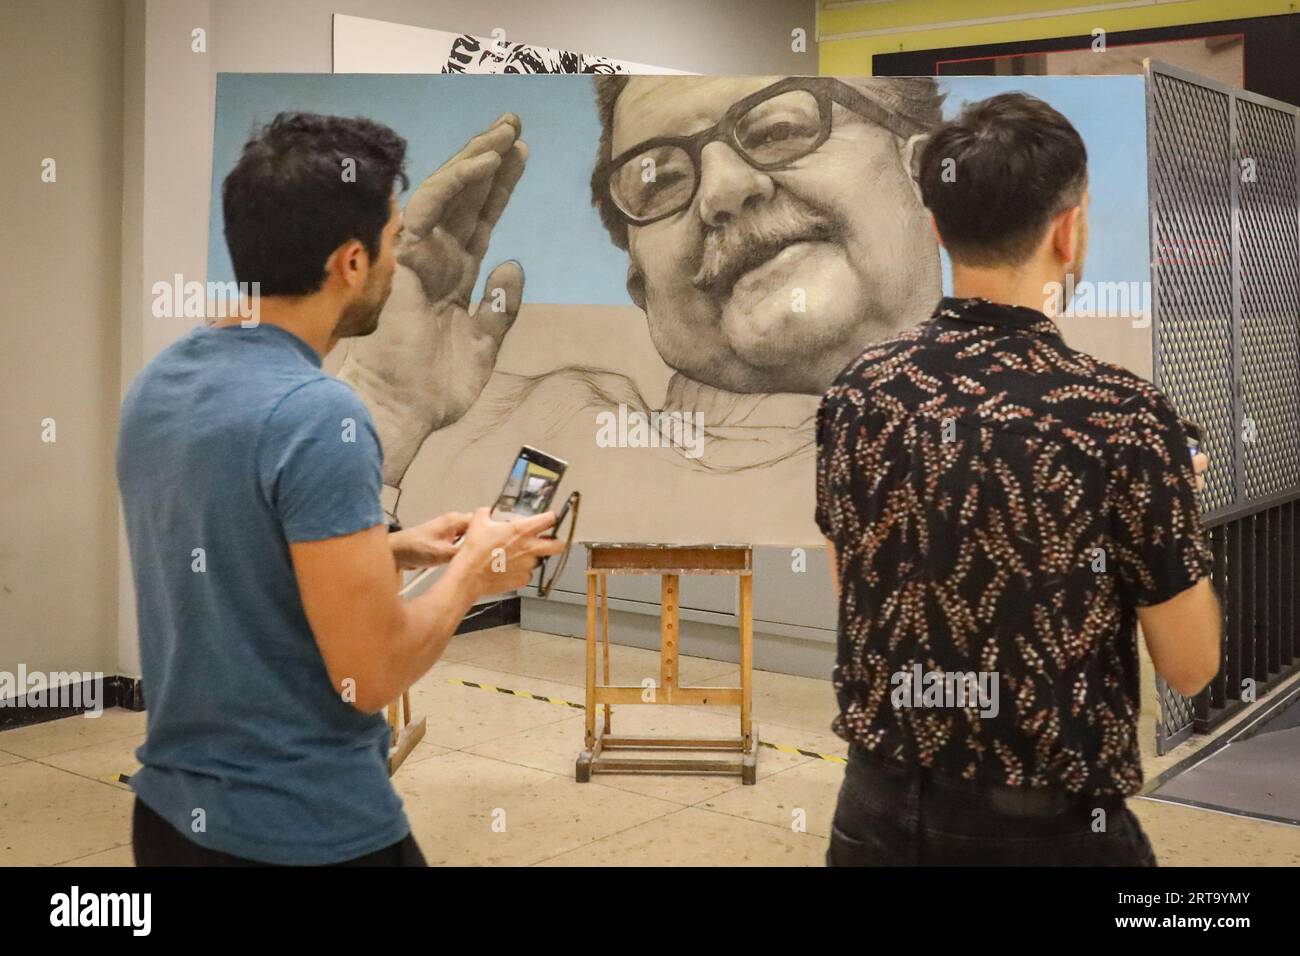 Madrid, Spain. 11th Sep, 2023. Two people look at a portrait of Salvador Allende at the entrance to the commemoration event for the 50th anniversary of the coup d'état in Chile. On the occasion of the 50th anniversary of the 1973 Chilean coup d'état by Augusto Pinochet against President Salvador Allende, an event is held at the headquarters of the Workers' Commissions (CCOO) in Madrid. Credit: SOPA Images Limited/Alamy Live News Stock Photo